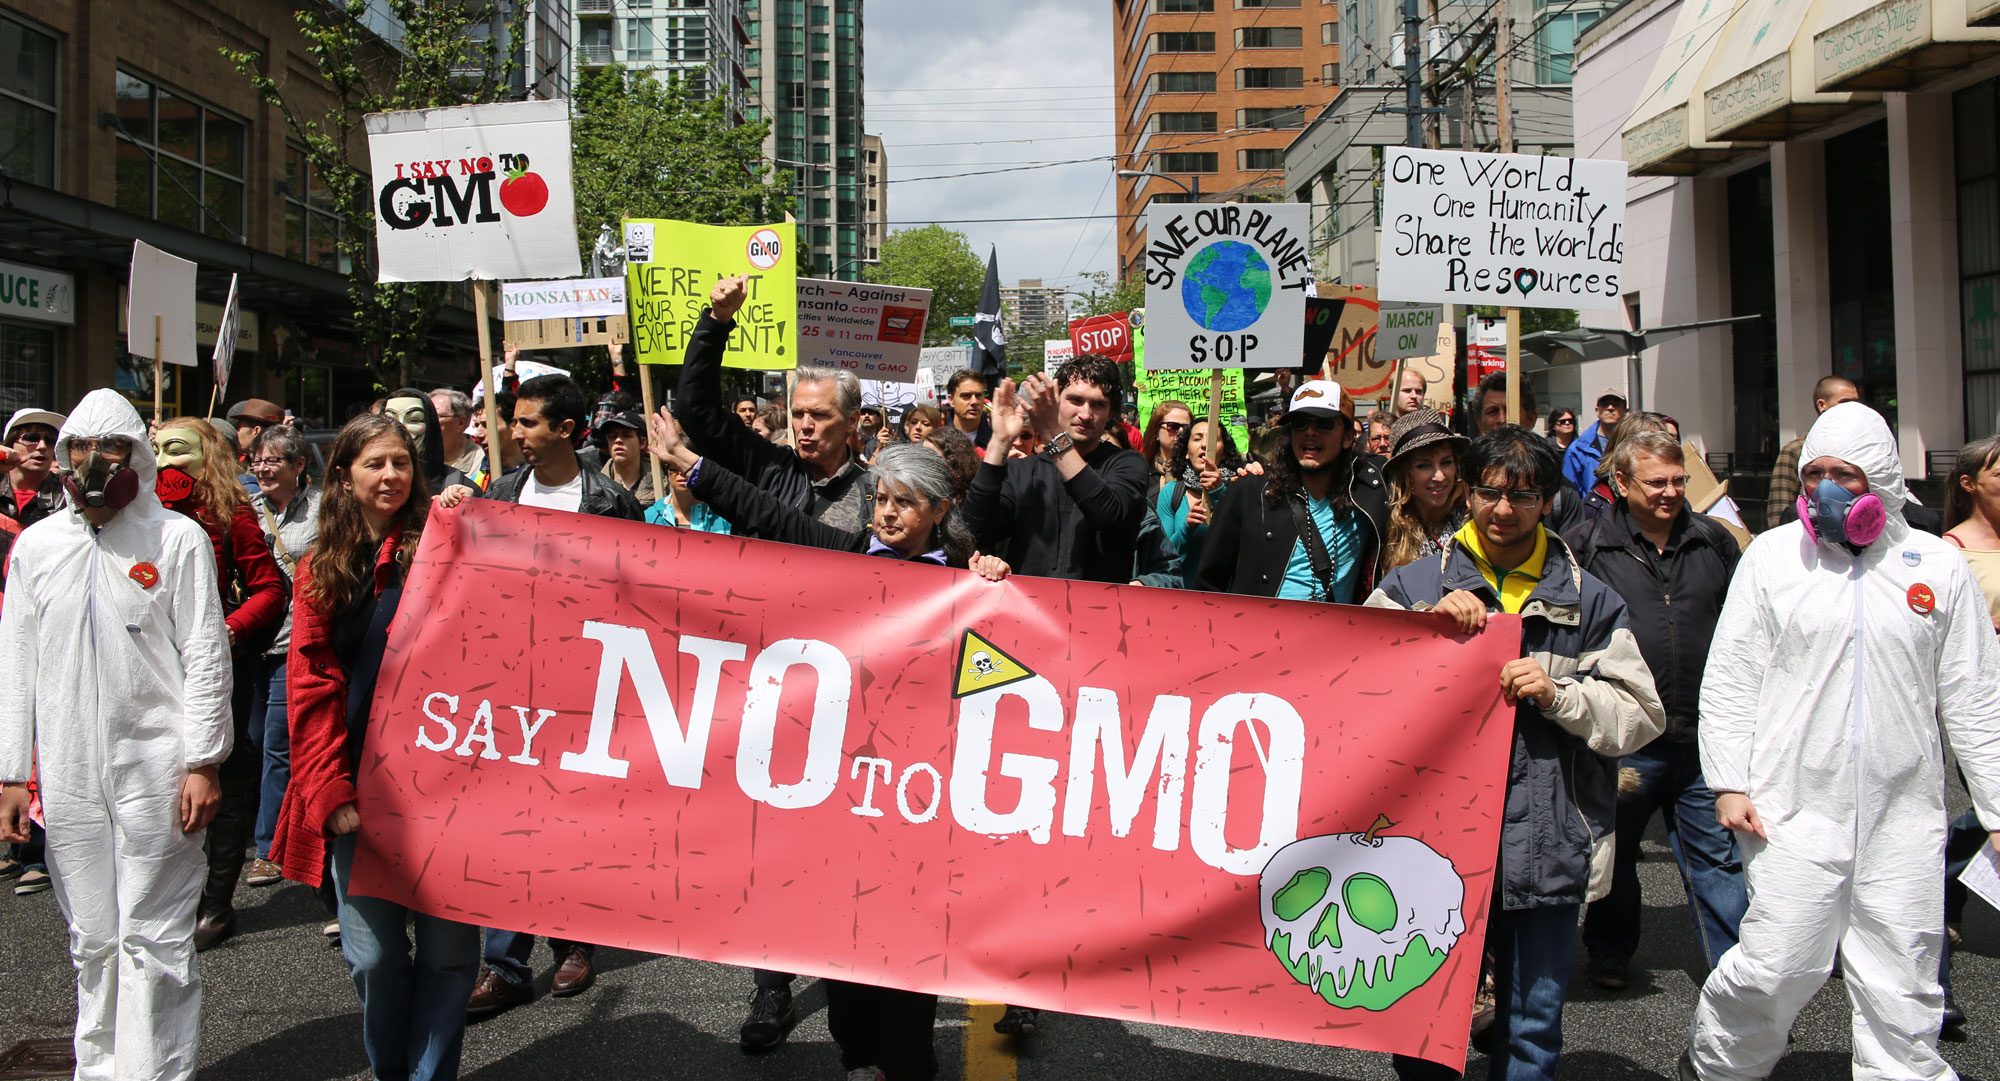 Photograph of a protest march against Monsanto. The photo shows a group of people marching down a street between buildings. The closest people hold a red banner that says "Say no to GMO" on it. The banner is flanked by two people in white hazmat suits and respirators. Other protest signs say things like "I say no to GMO," "Save our planet SOP," and "One world one humanity share the world's resources."